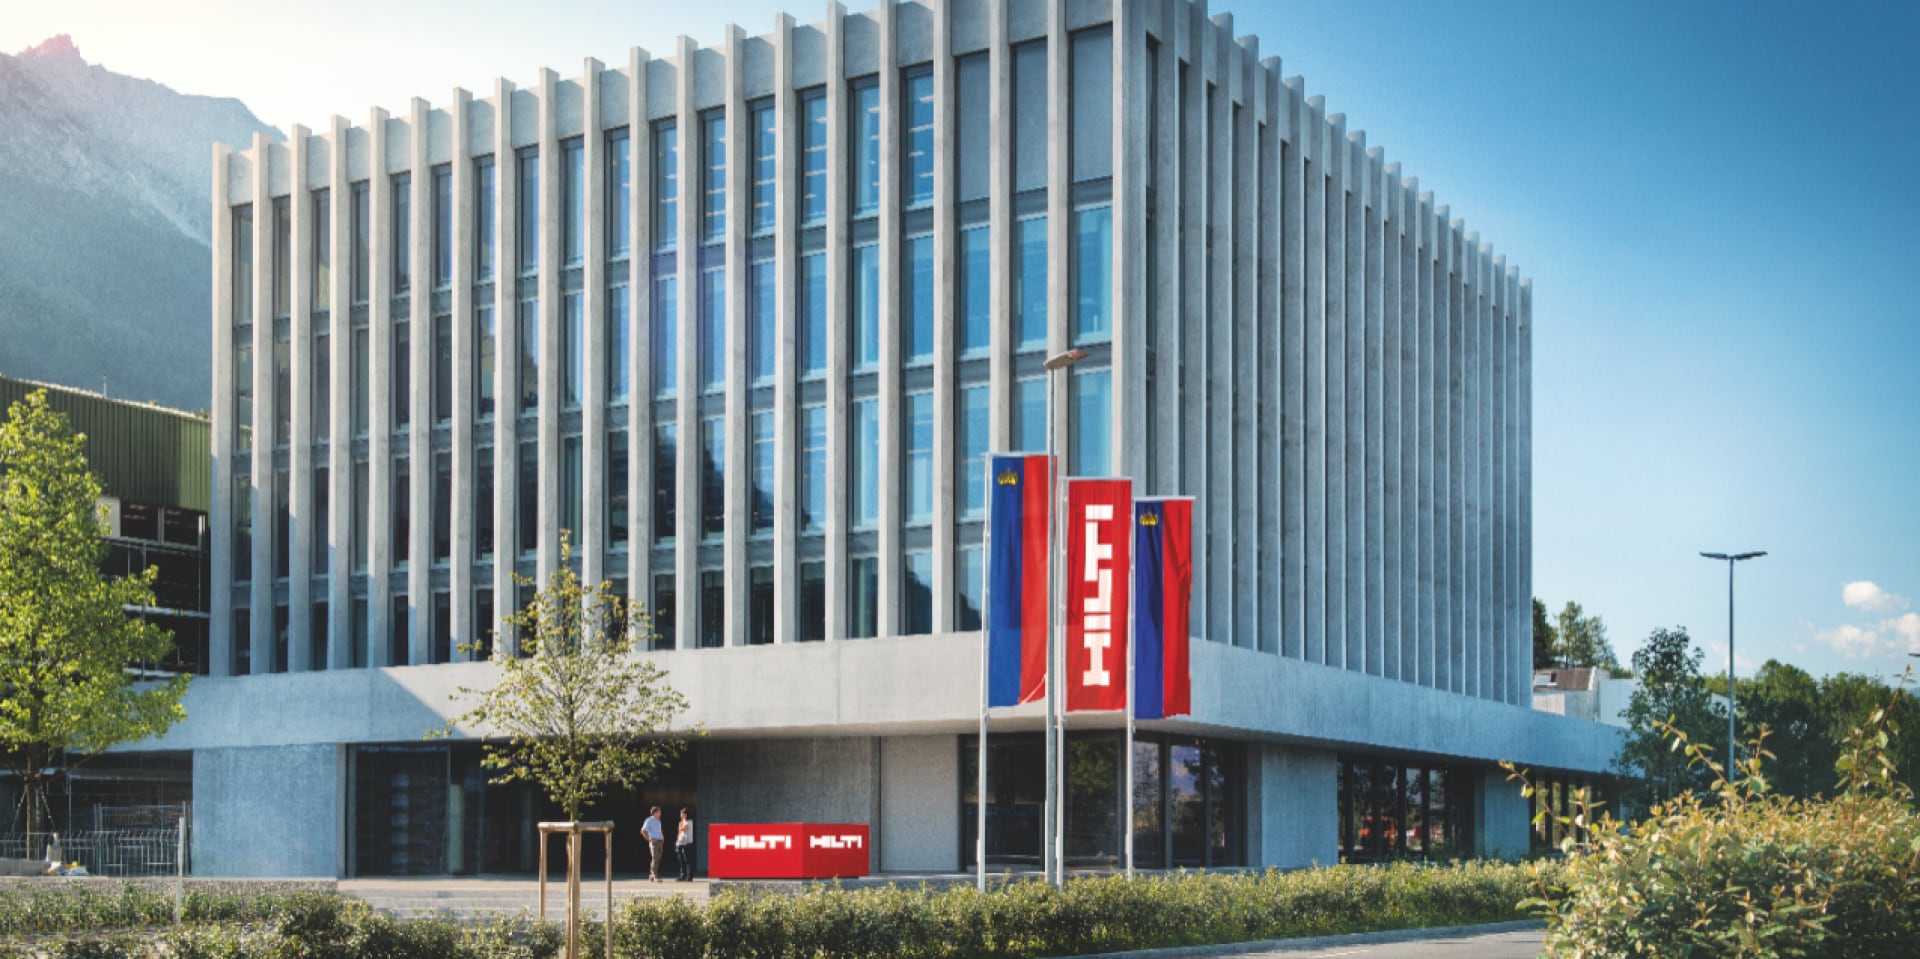 hilti announces package of measures to mitigate the effects of the coronavirus crisis